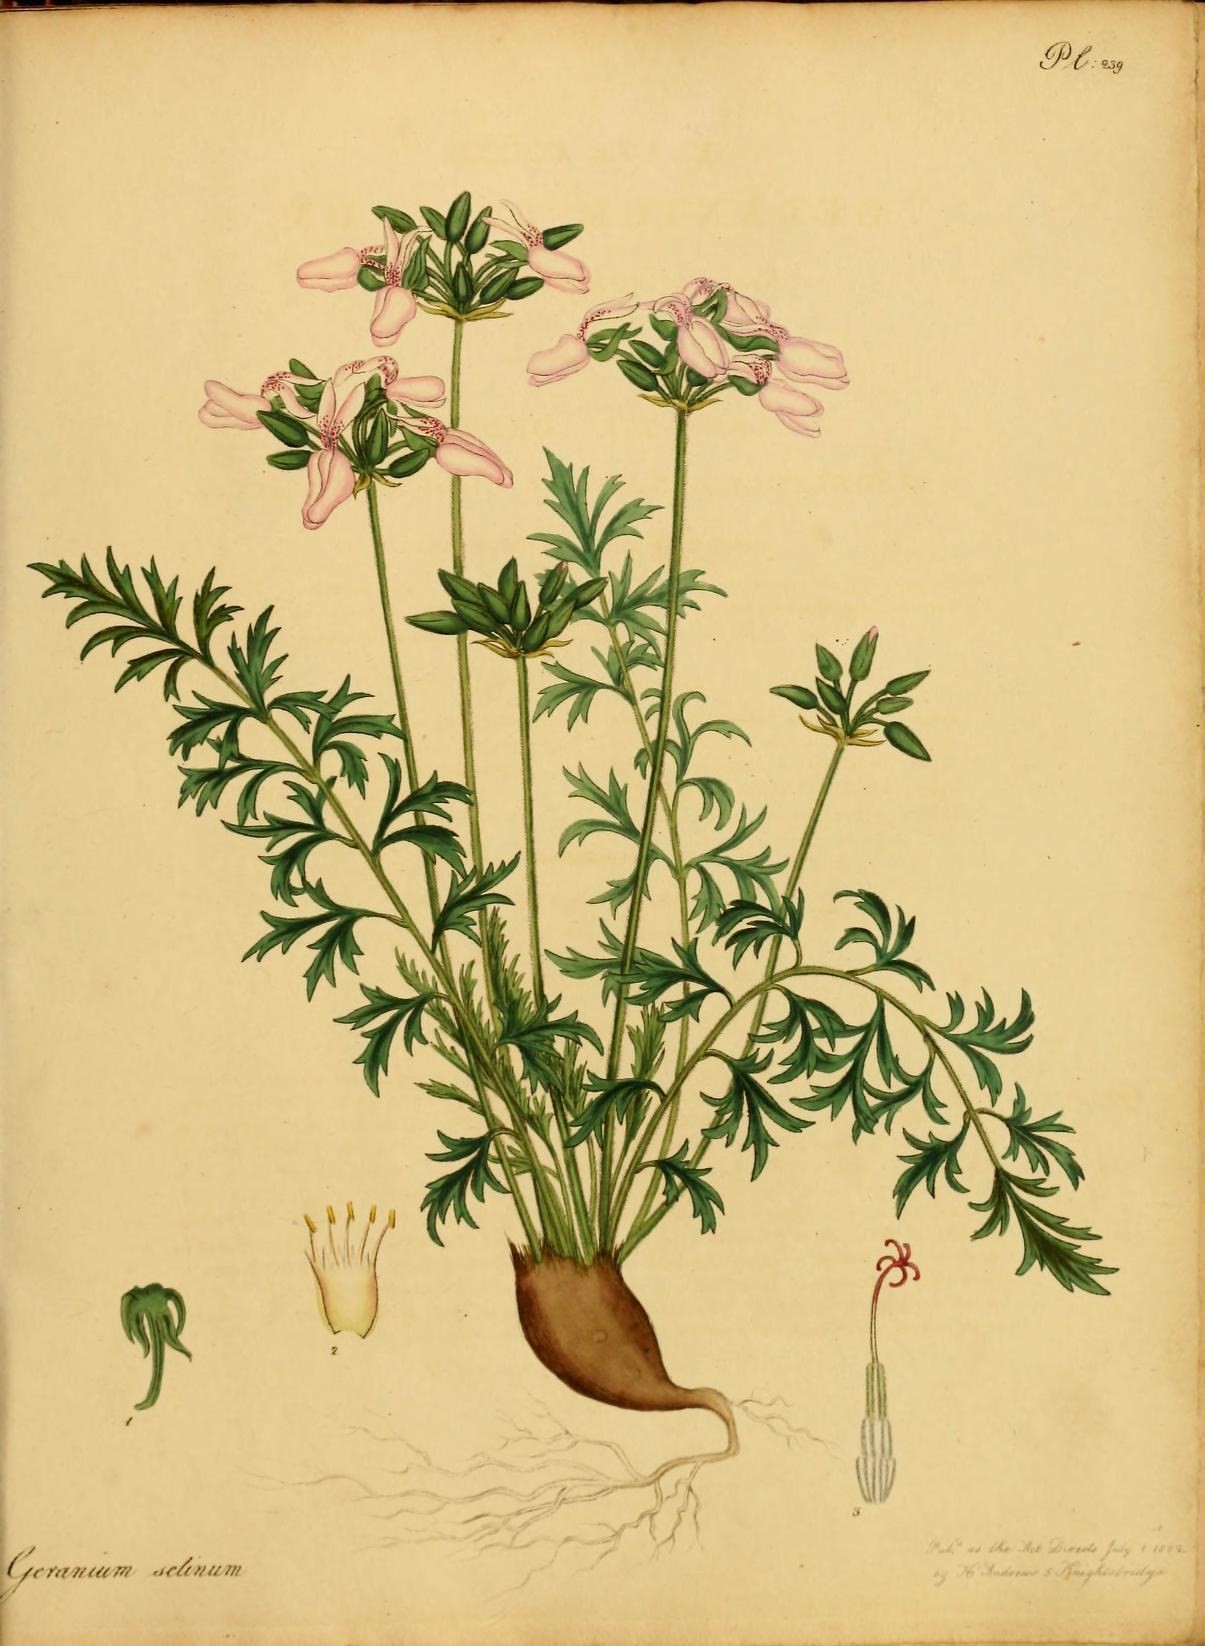 an antique book with a floral arrangement on the cover